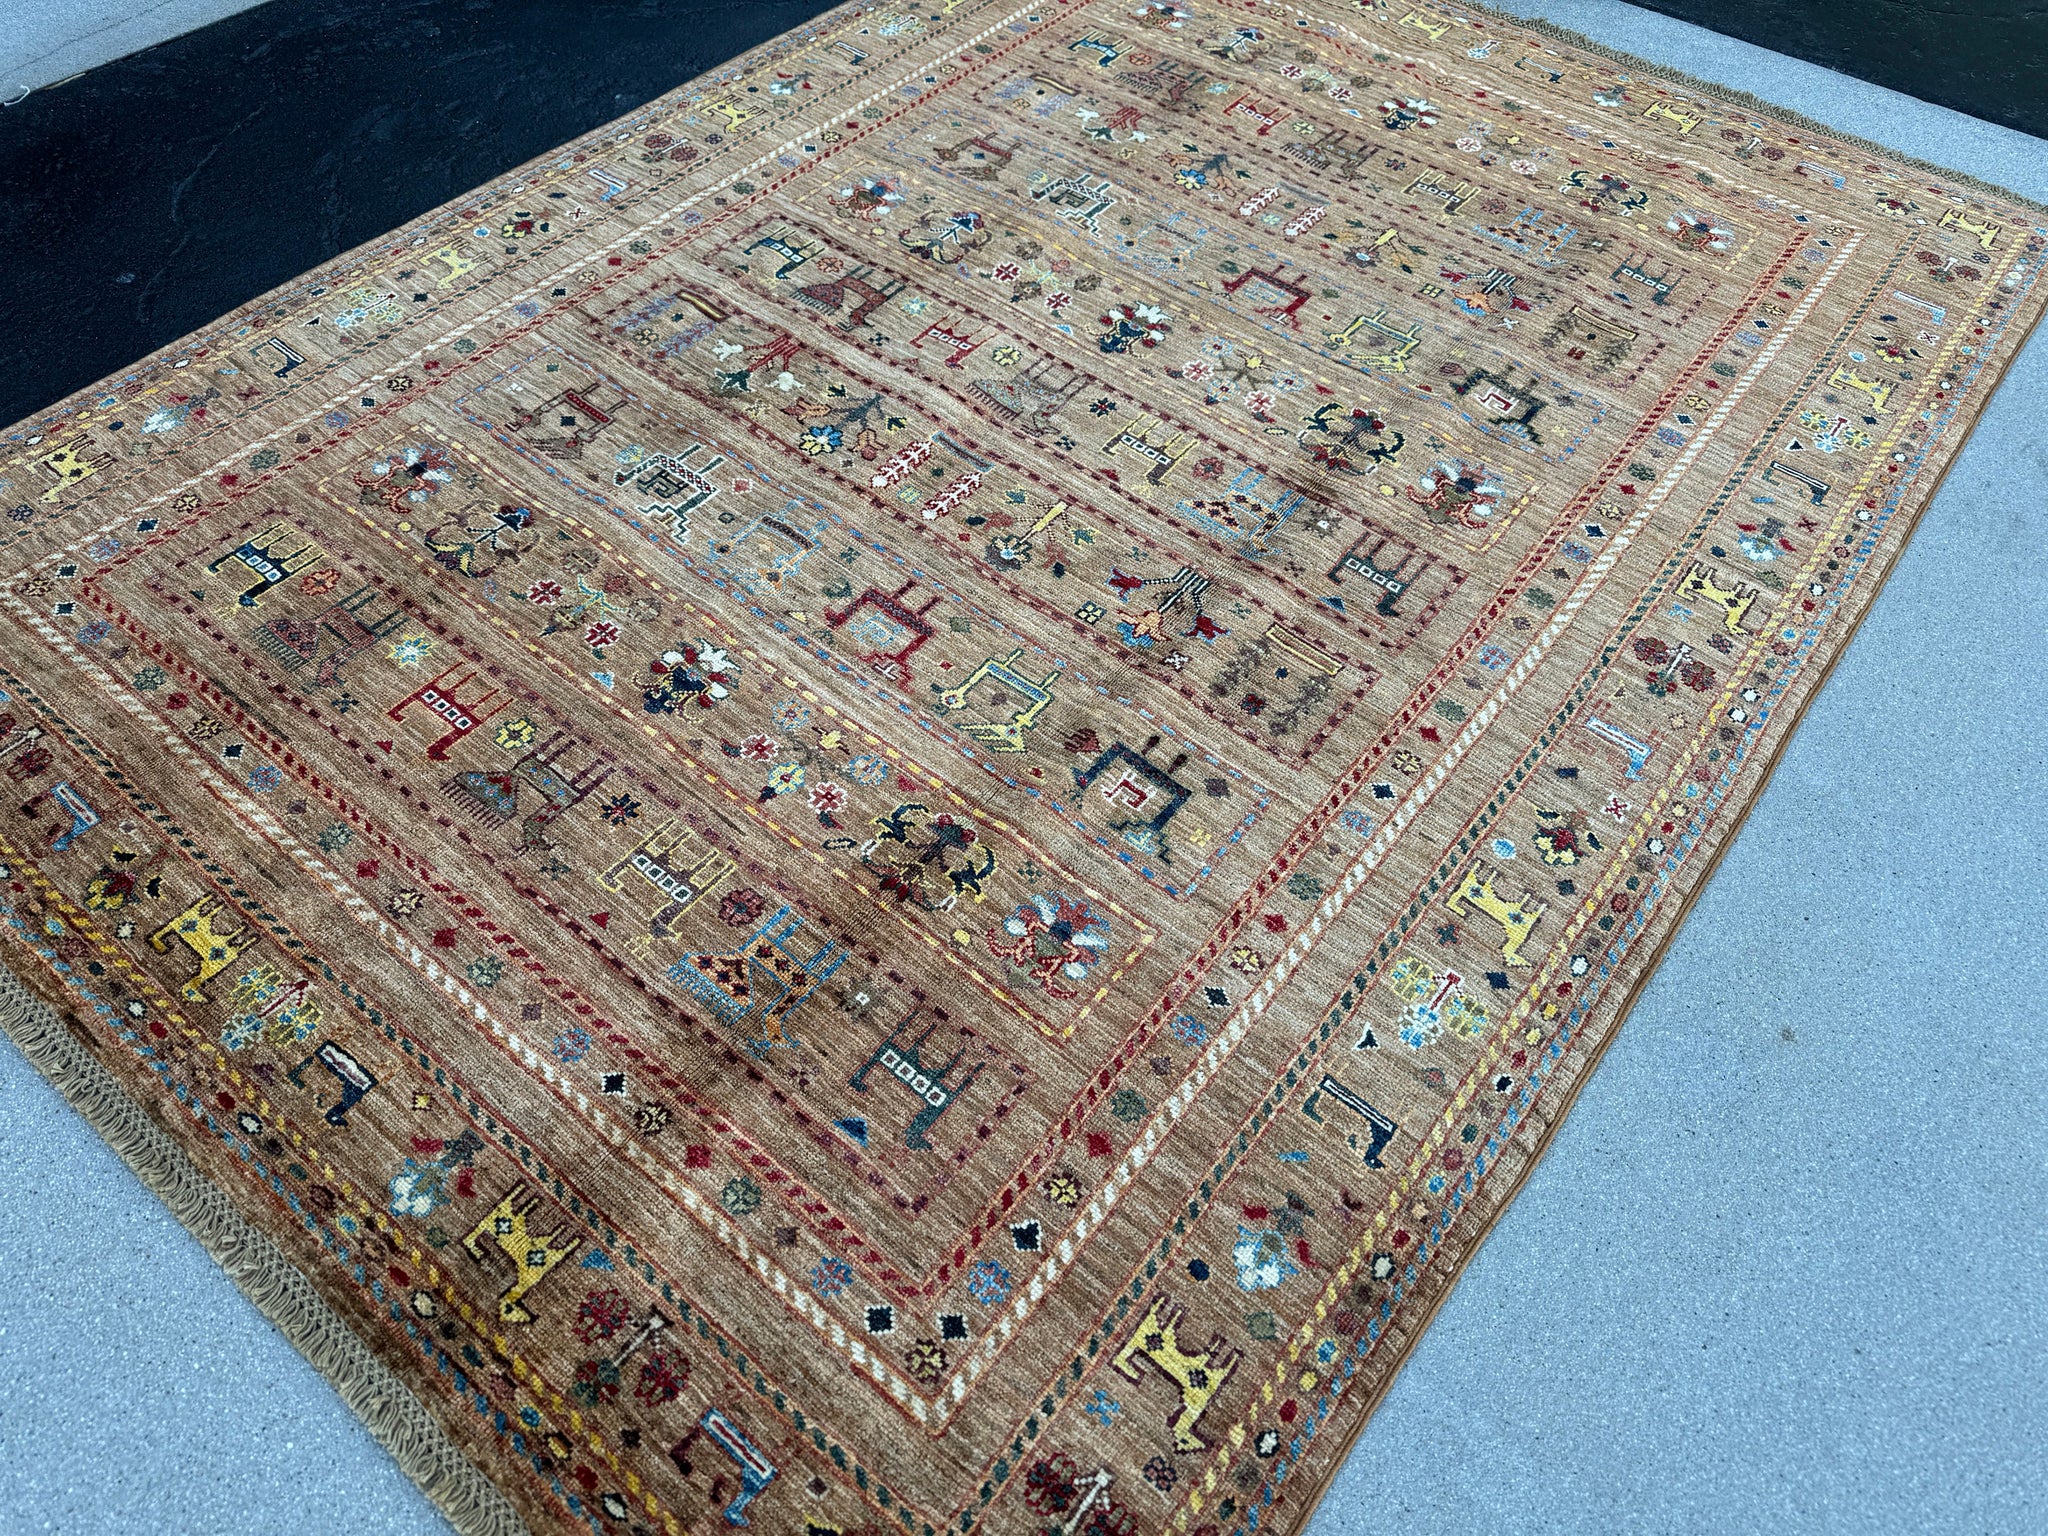 5x7 (150x215) Hand Knotted Afghan Rug | Coffee Chocolate Gold Sapphire Blue Scarlet Red Ivory Rust Orange | Nature Animal Persian